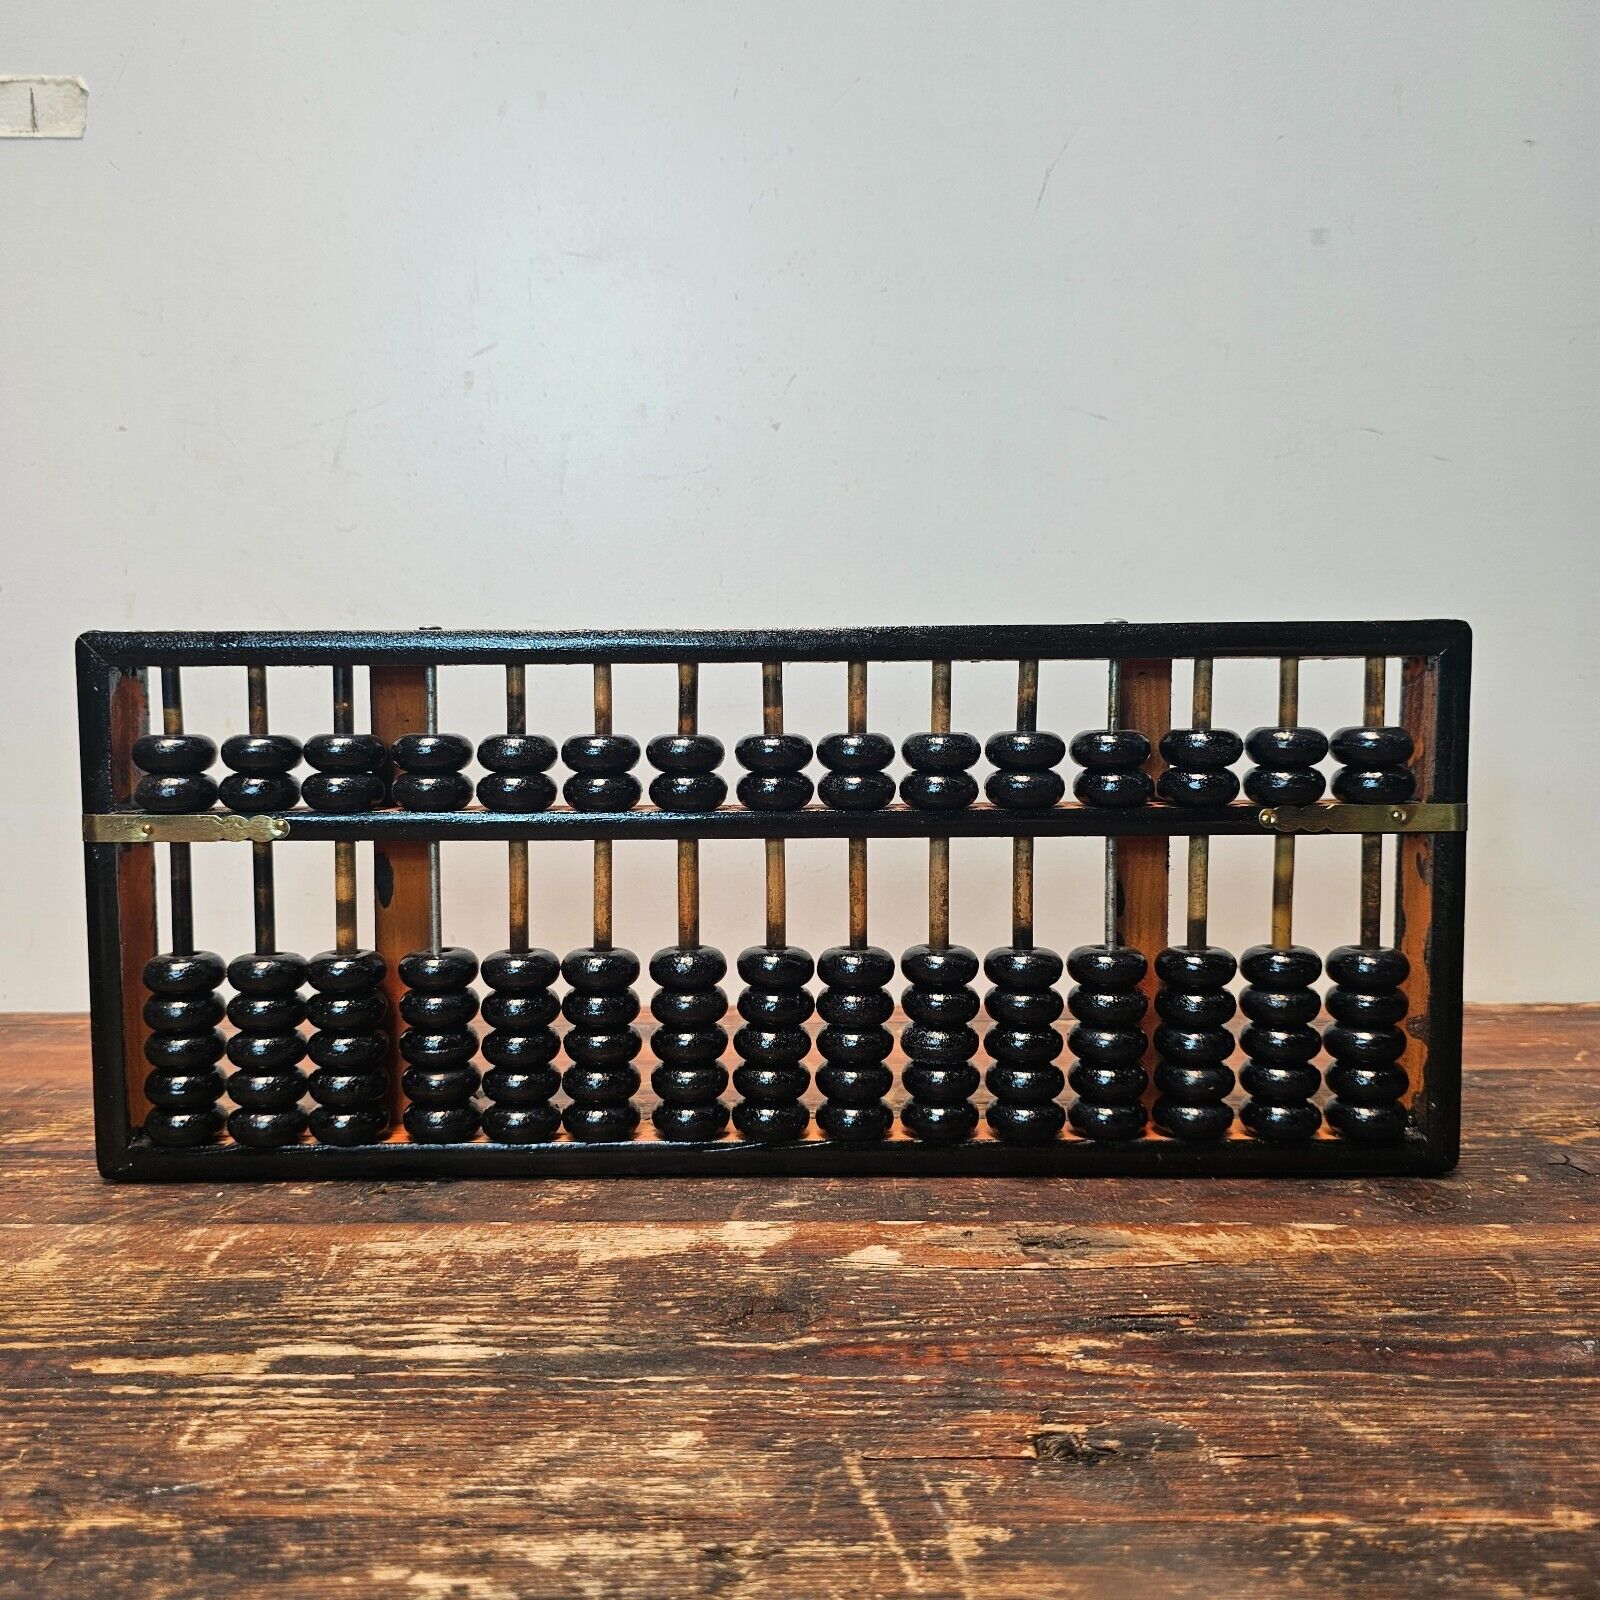 Vintage 15 Rows (105 Beads) Chinese Wooden Beads Arithmetic Abacus Calculator